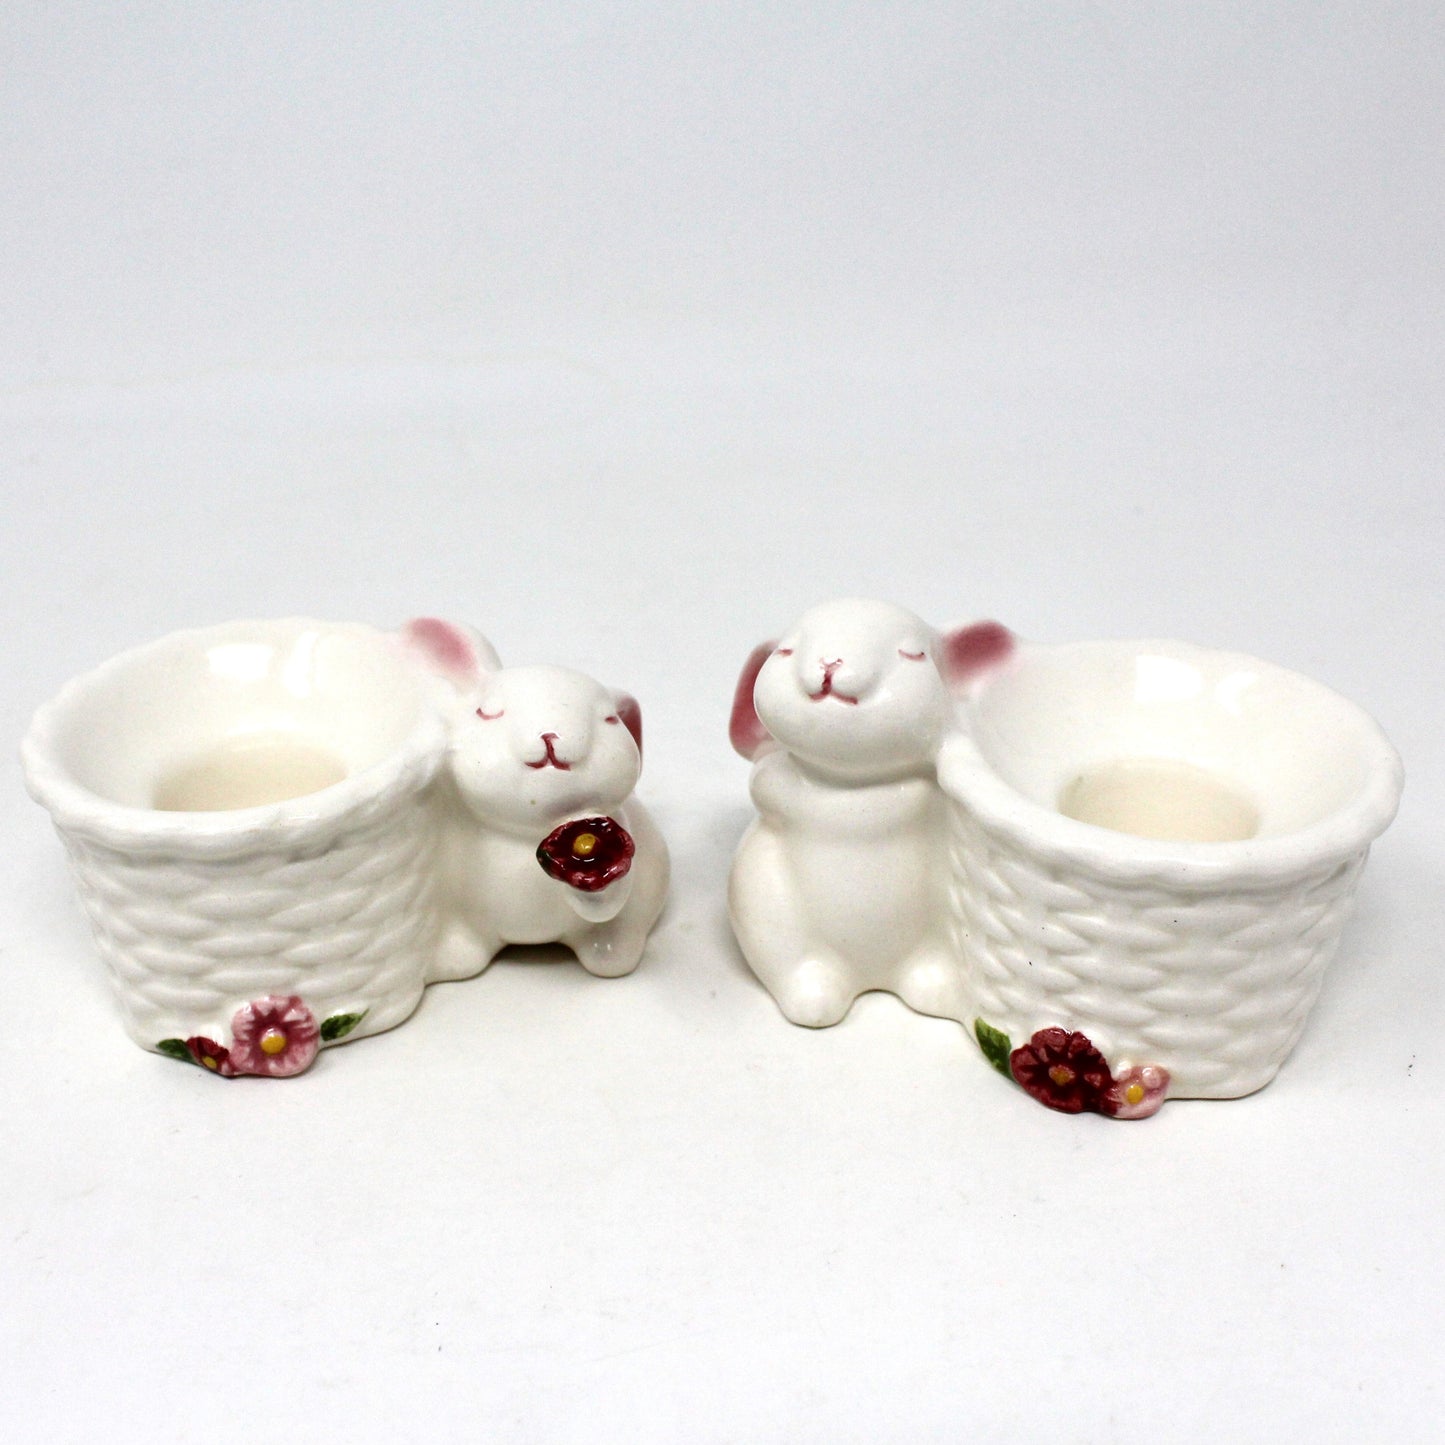 Candle Holders, Avon, Bunnies with Baskets, Ceramic Taper Holders, Vintage